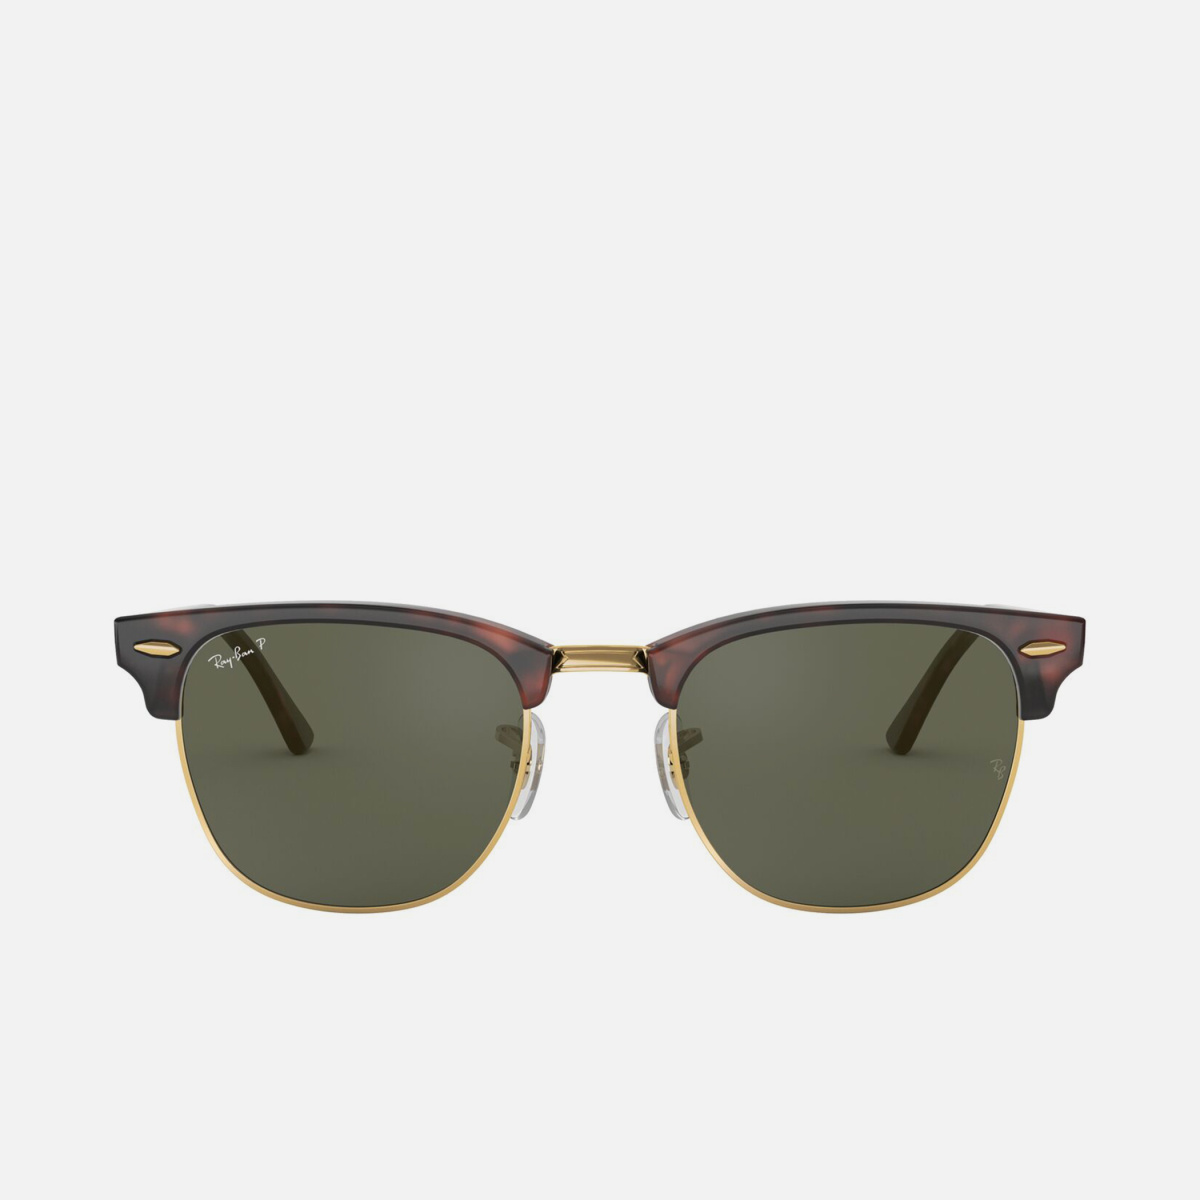 Ray-Ban Sunglasses RB3016 CLUBMASTER 133671 - Best Price and Available as  Prescription Sunglasses